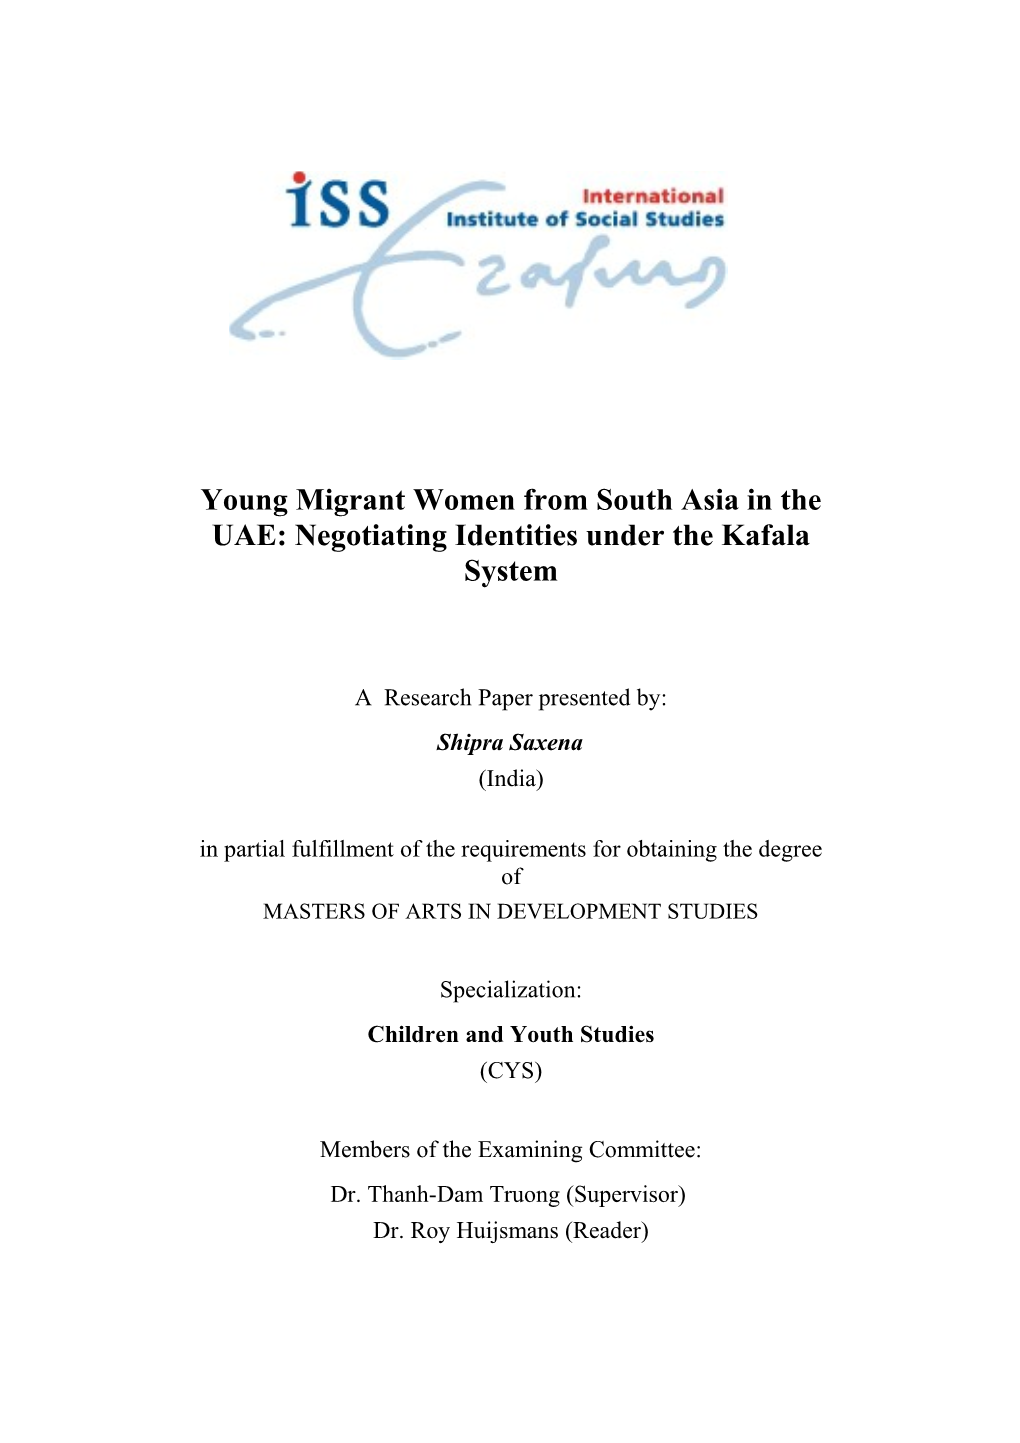 Young Migrant Women from South Asia in the UAE: Negotiating Identities Under the Kafala System